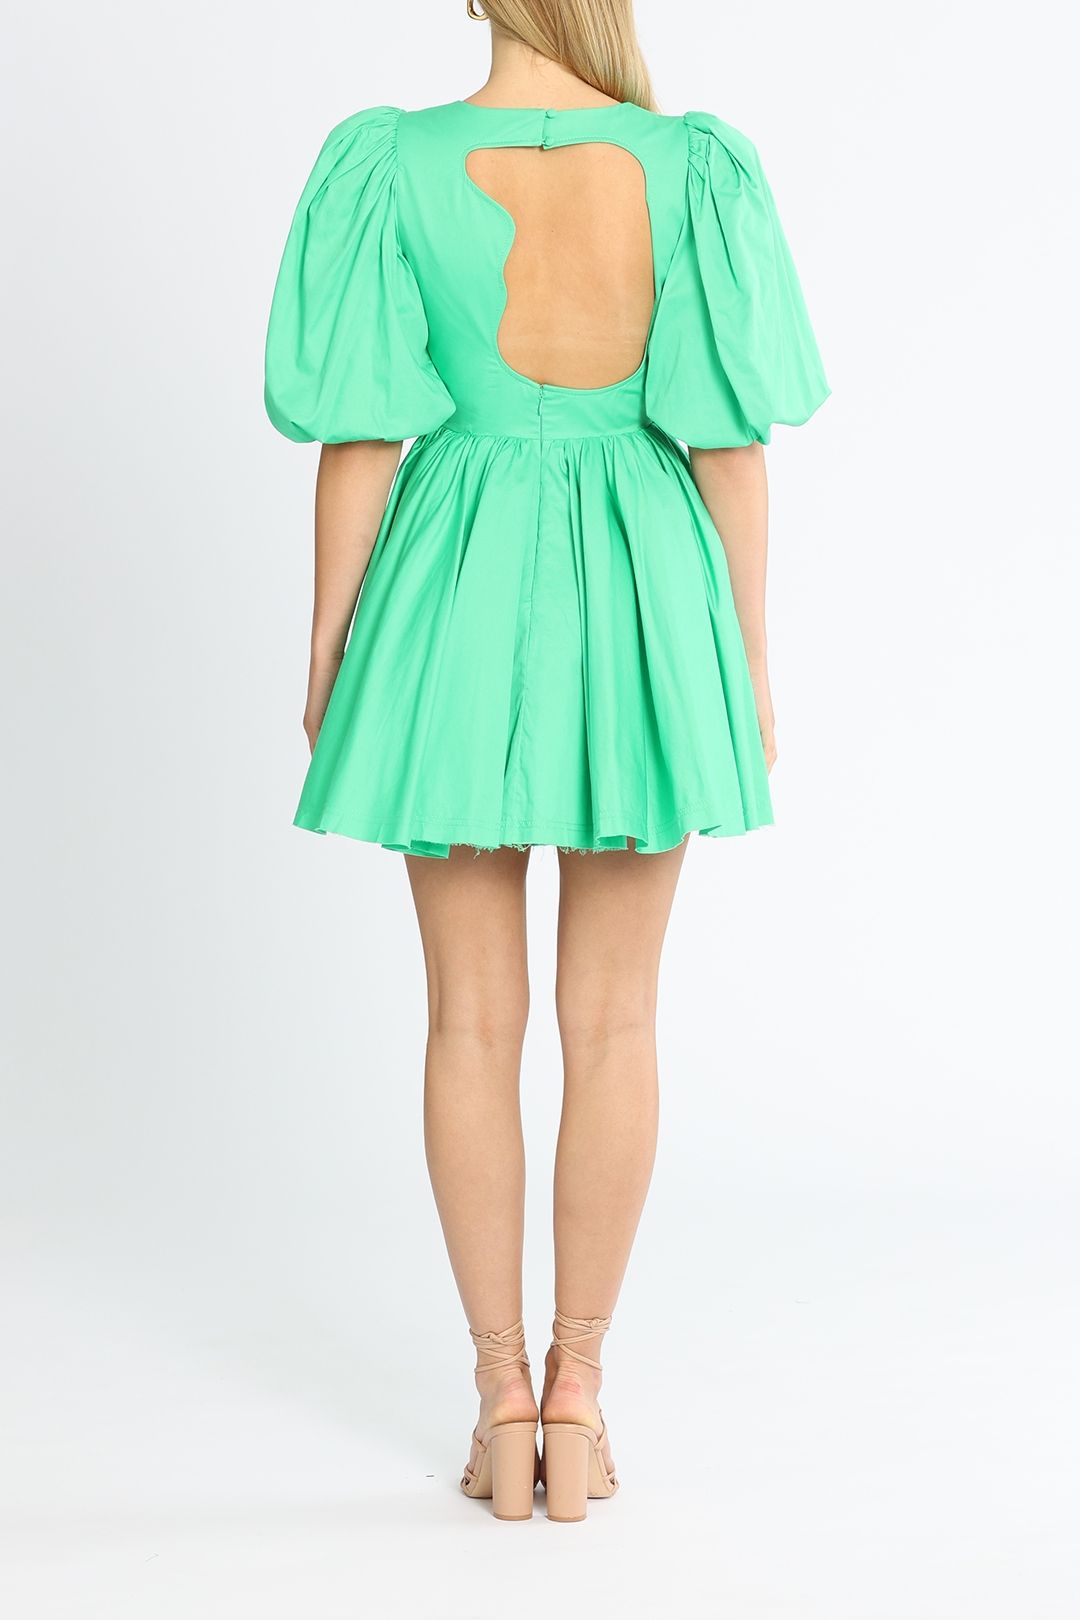 AJE Colette Cut Out Mini Dress Green Backless